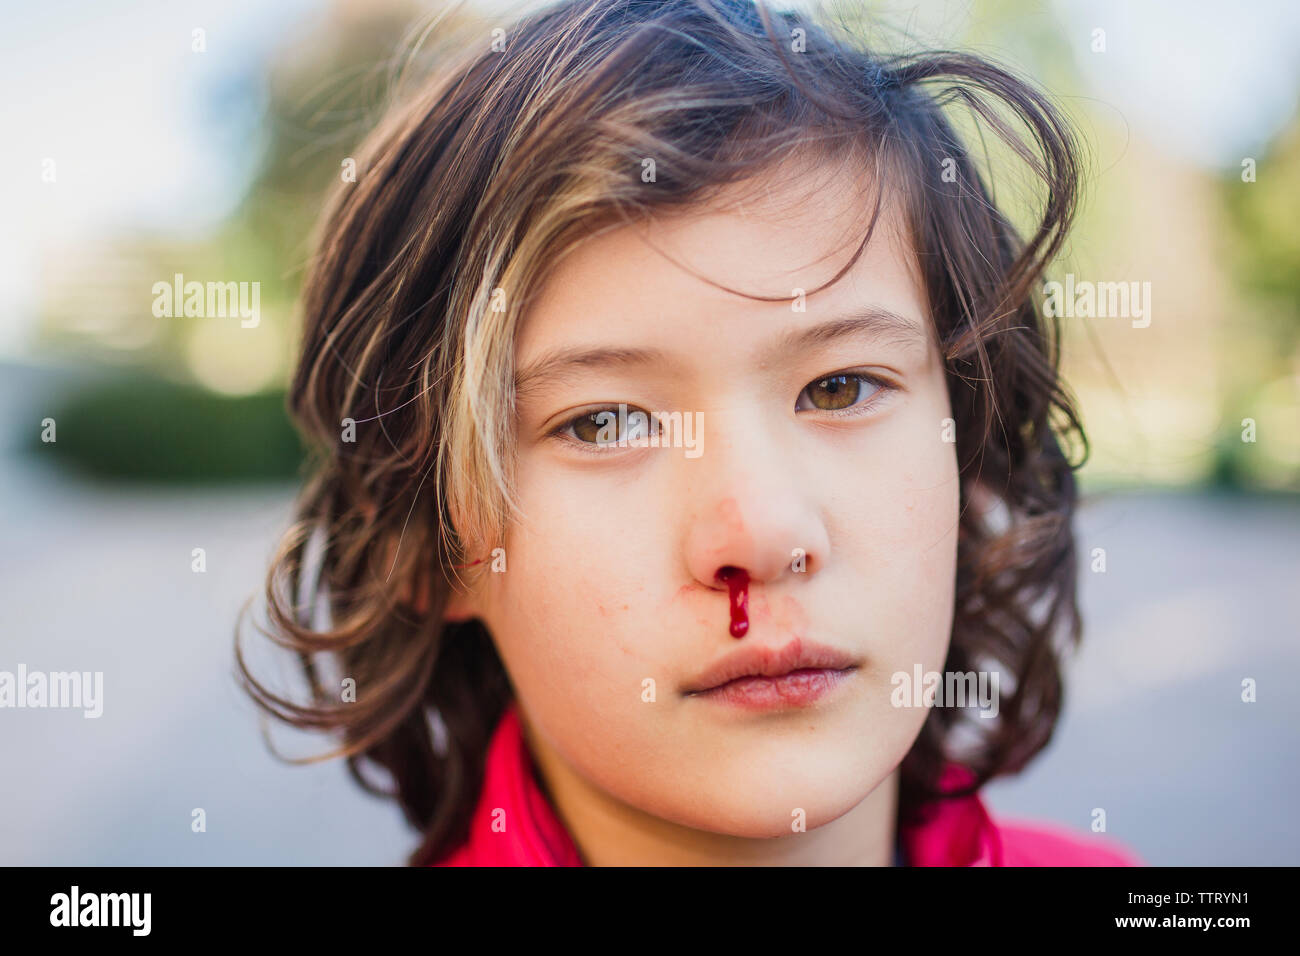 A boy looks directly at the camera with a nosebleed Stock Photo